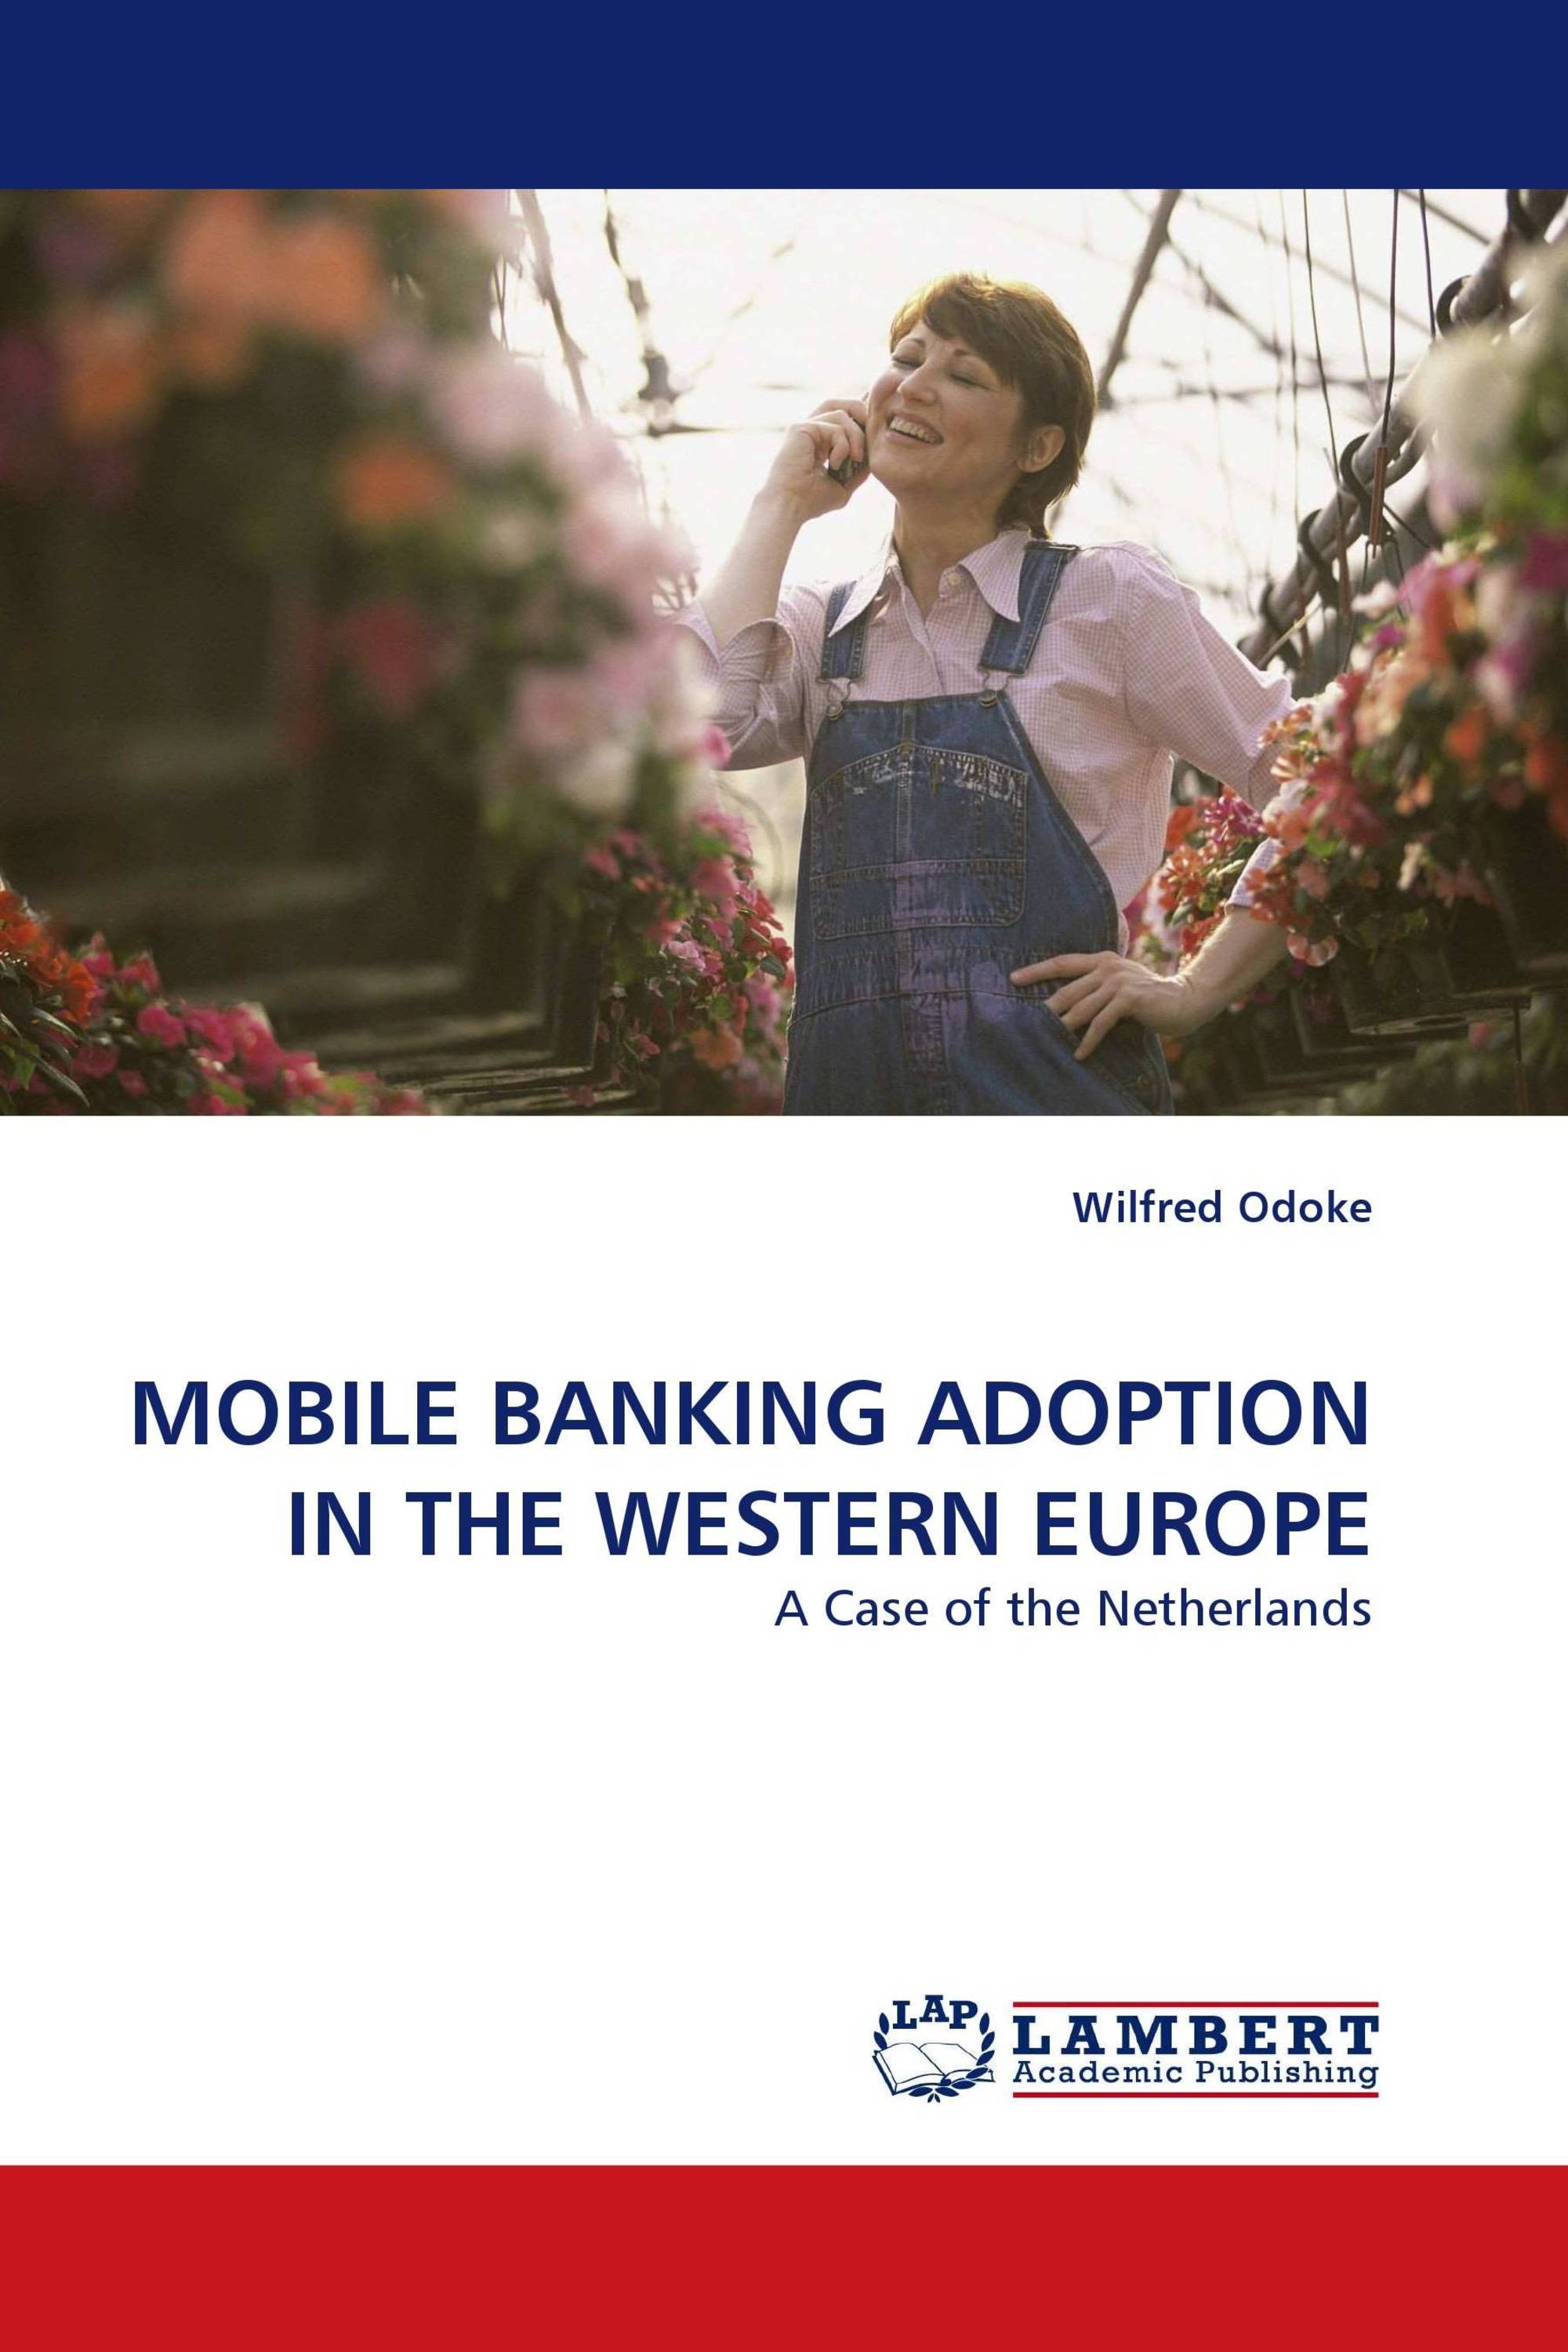 MOBILE BANKING ADOPTION IN THE WESTERN EUROPE